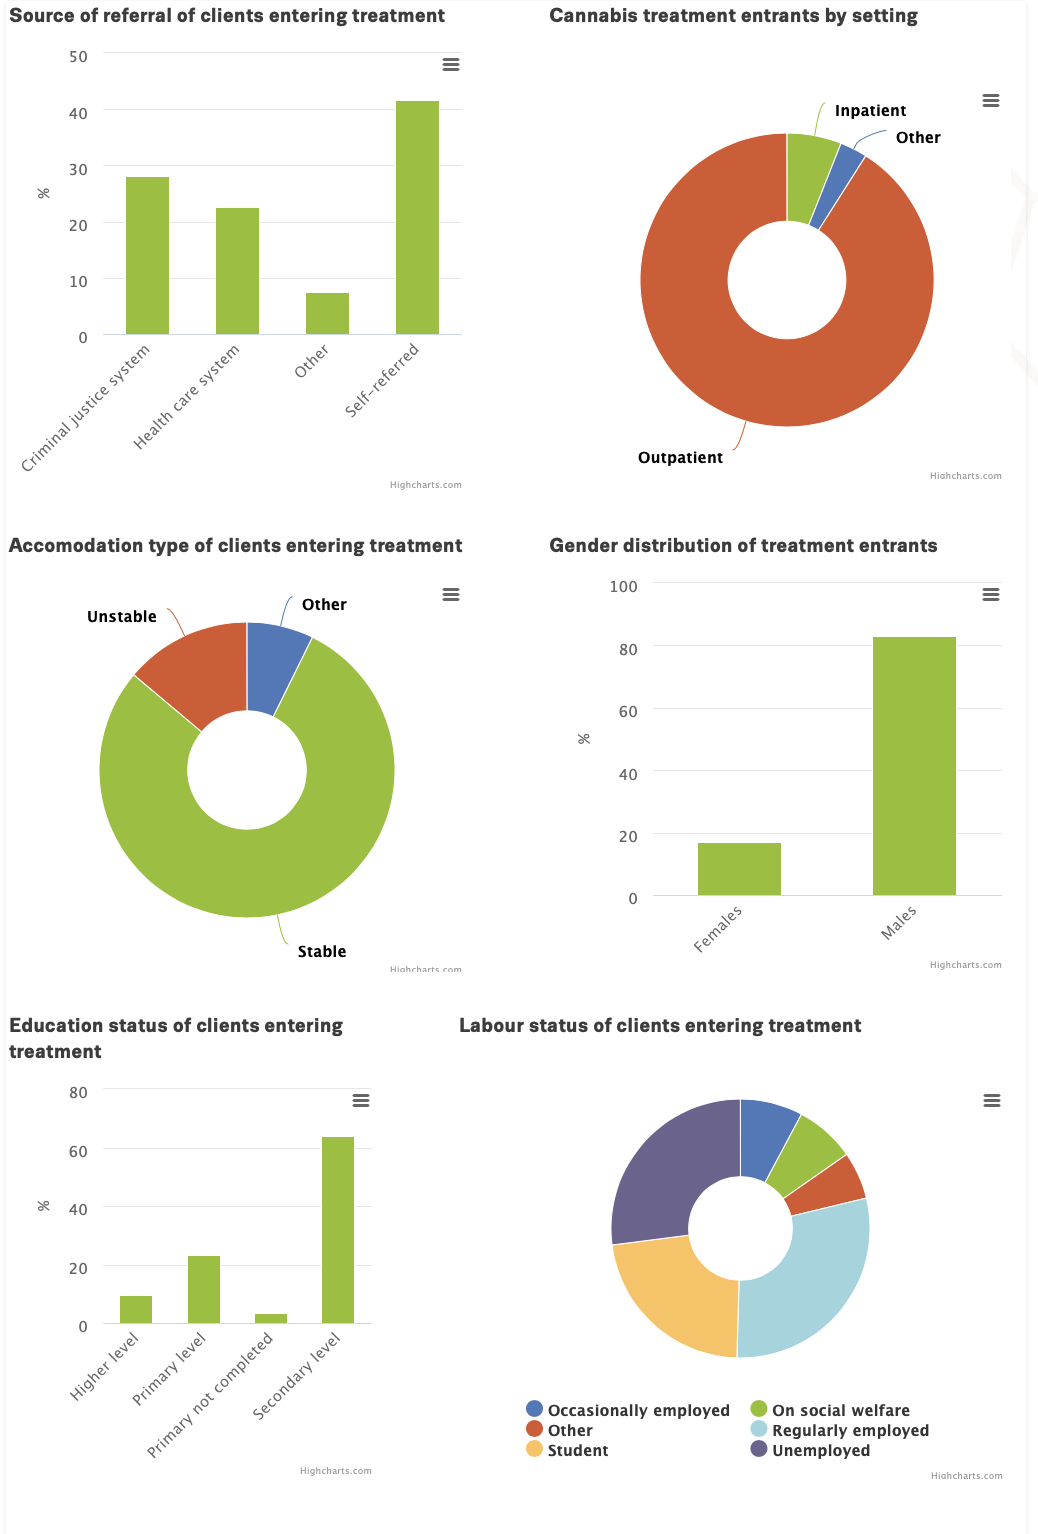 Infograhics shows overview of statistics of clients entering treatment for cannabis use in Europe. Most are men, in stable accomodation and self-referred. There are a range of employment statuses. Most are in stable accomodation.